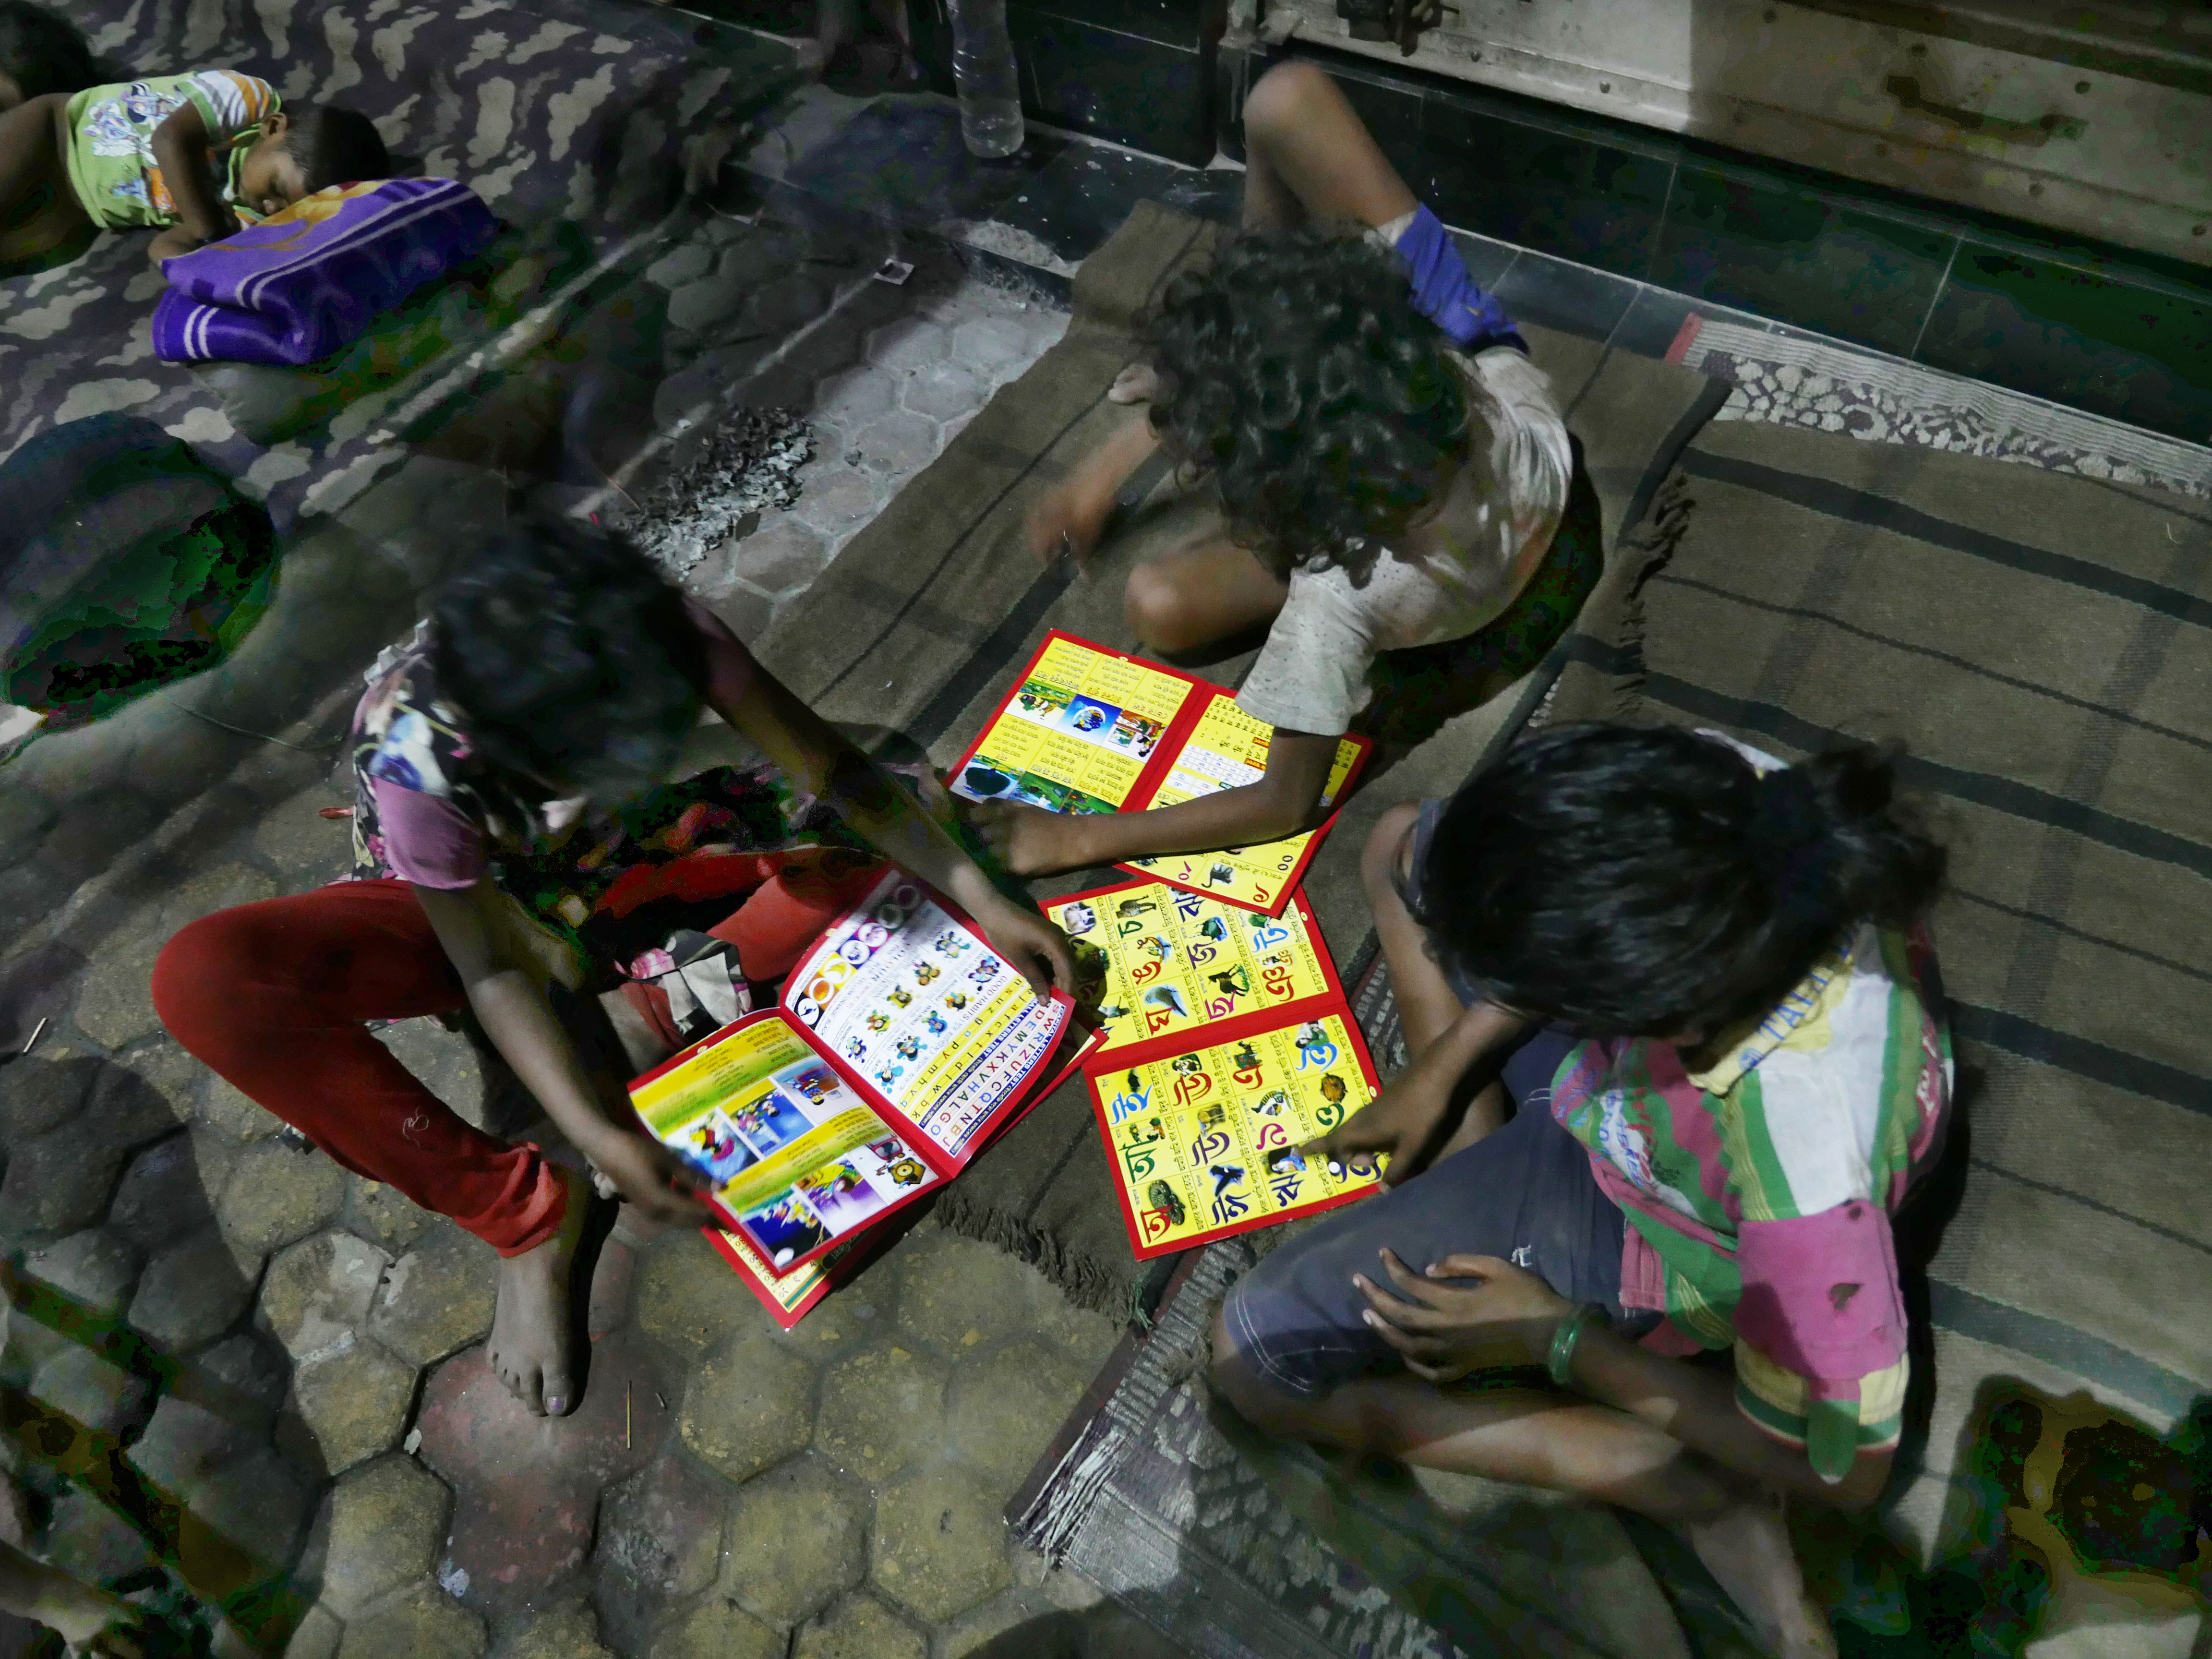 Children poring over books of figures and alphabets.